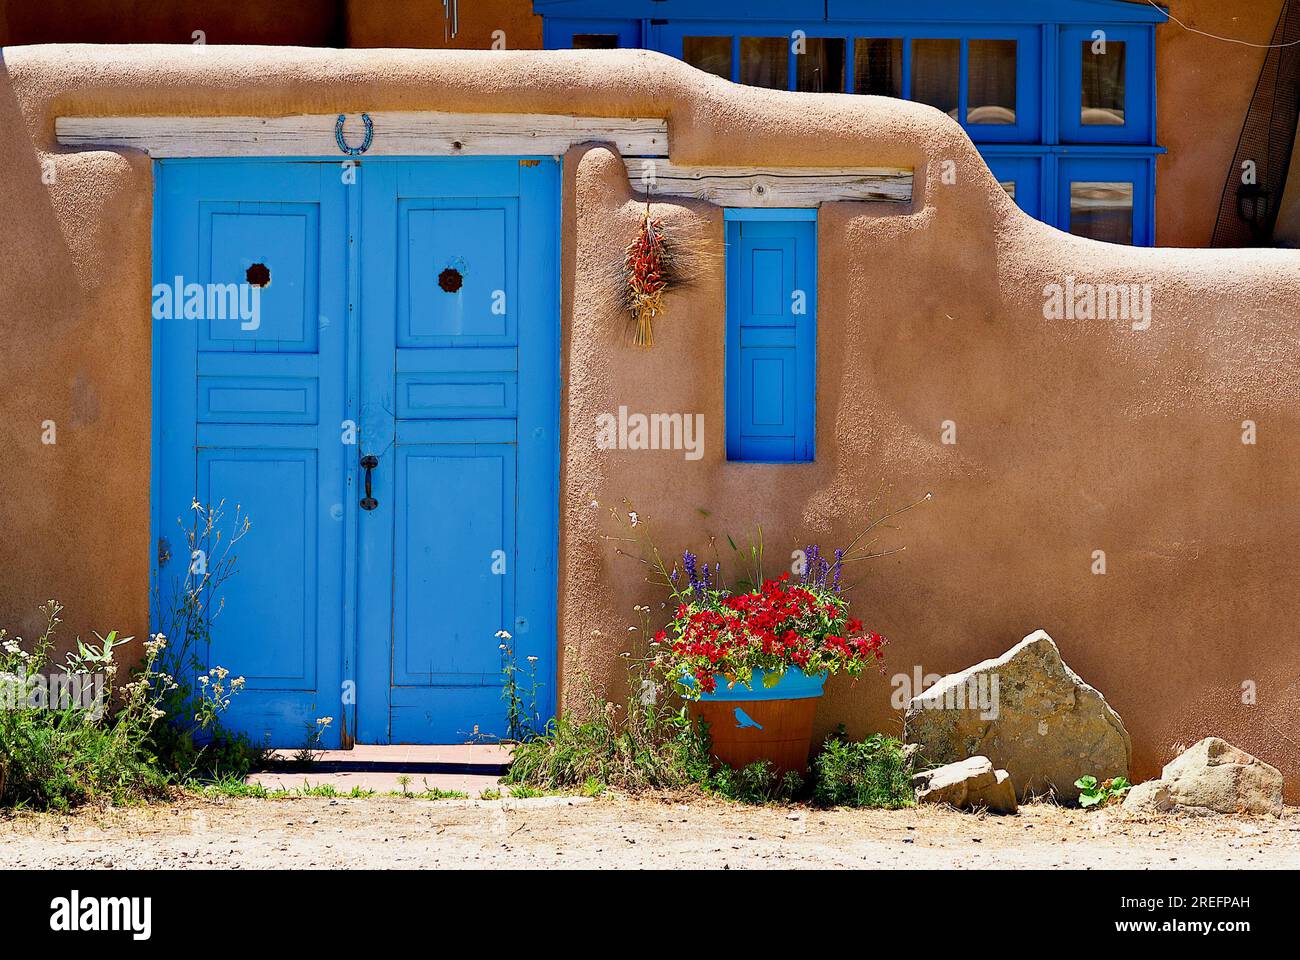 Rancho de Taos, New Mexico, USA - July 24, 2023: A vibrant blue-painted door and shutter stand in contrast to the brown adobe walls of a private home. Stock Photo